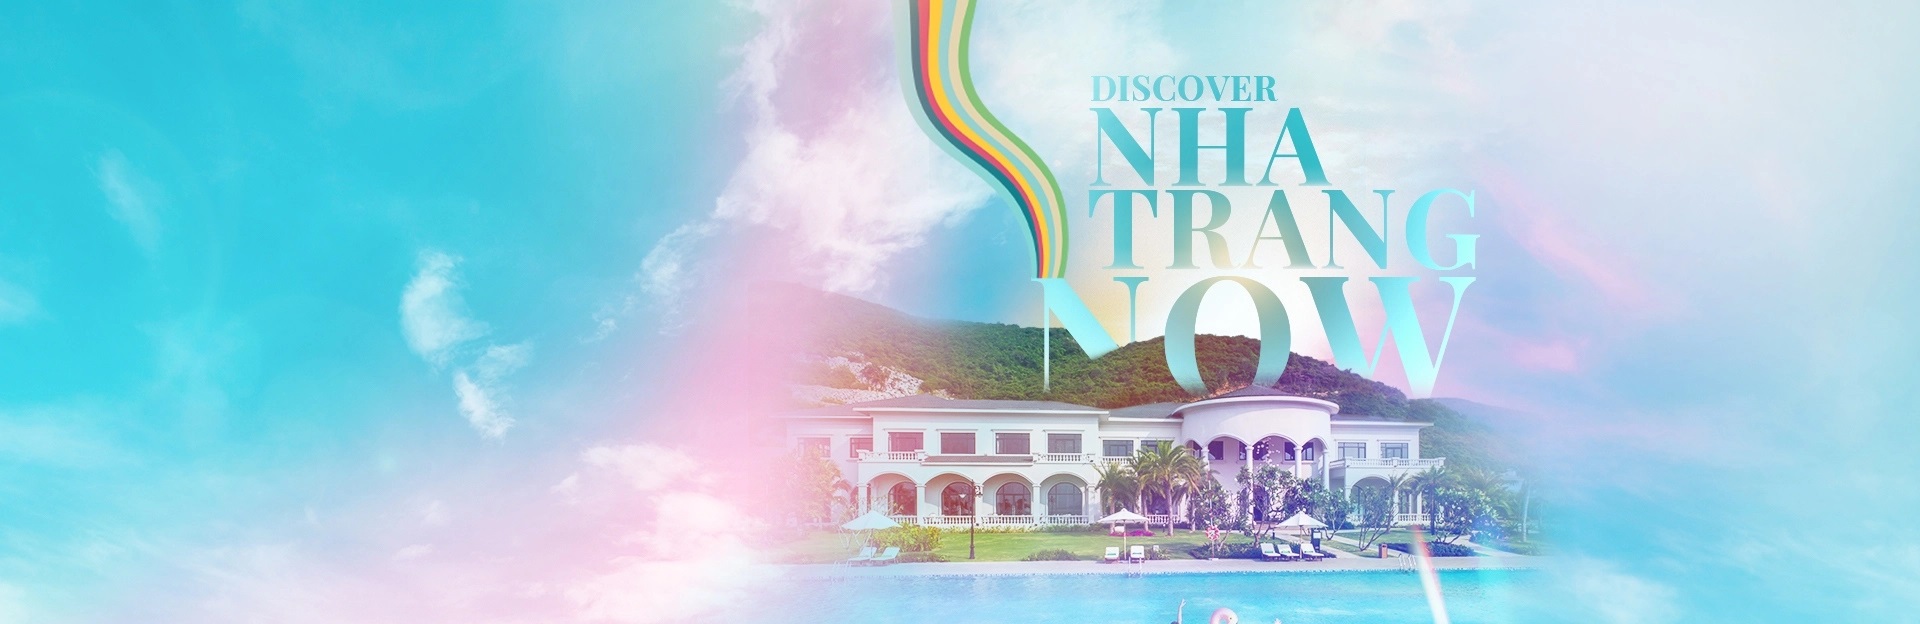 Discovery Nha Trang Now